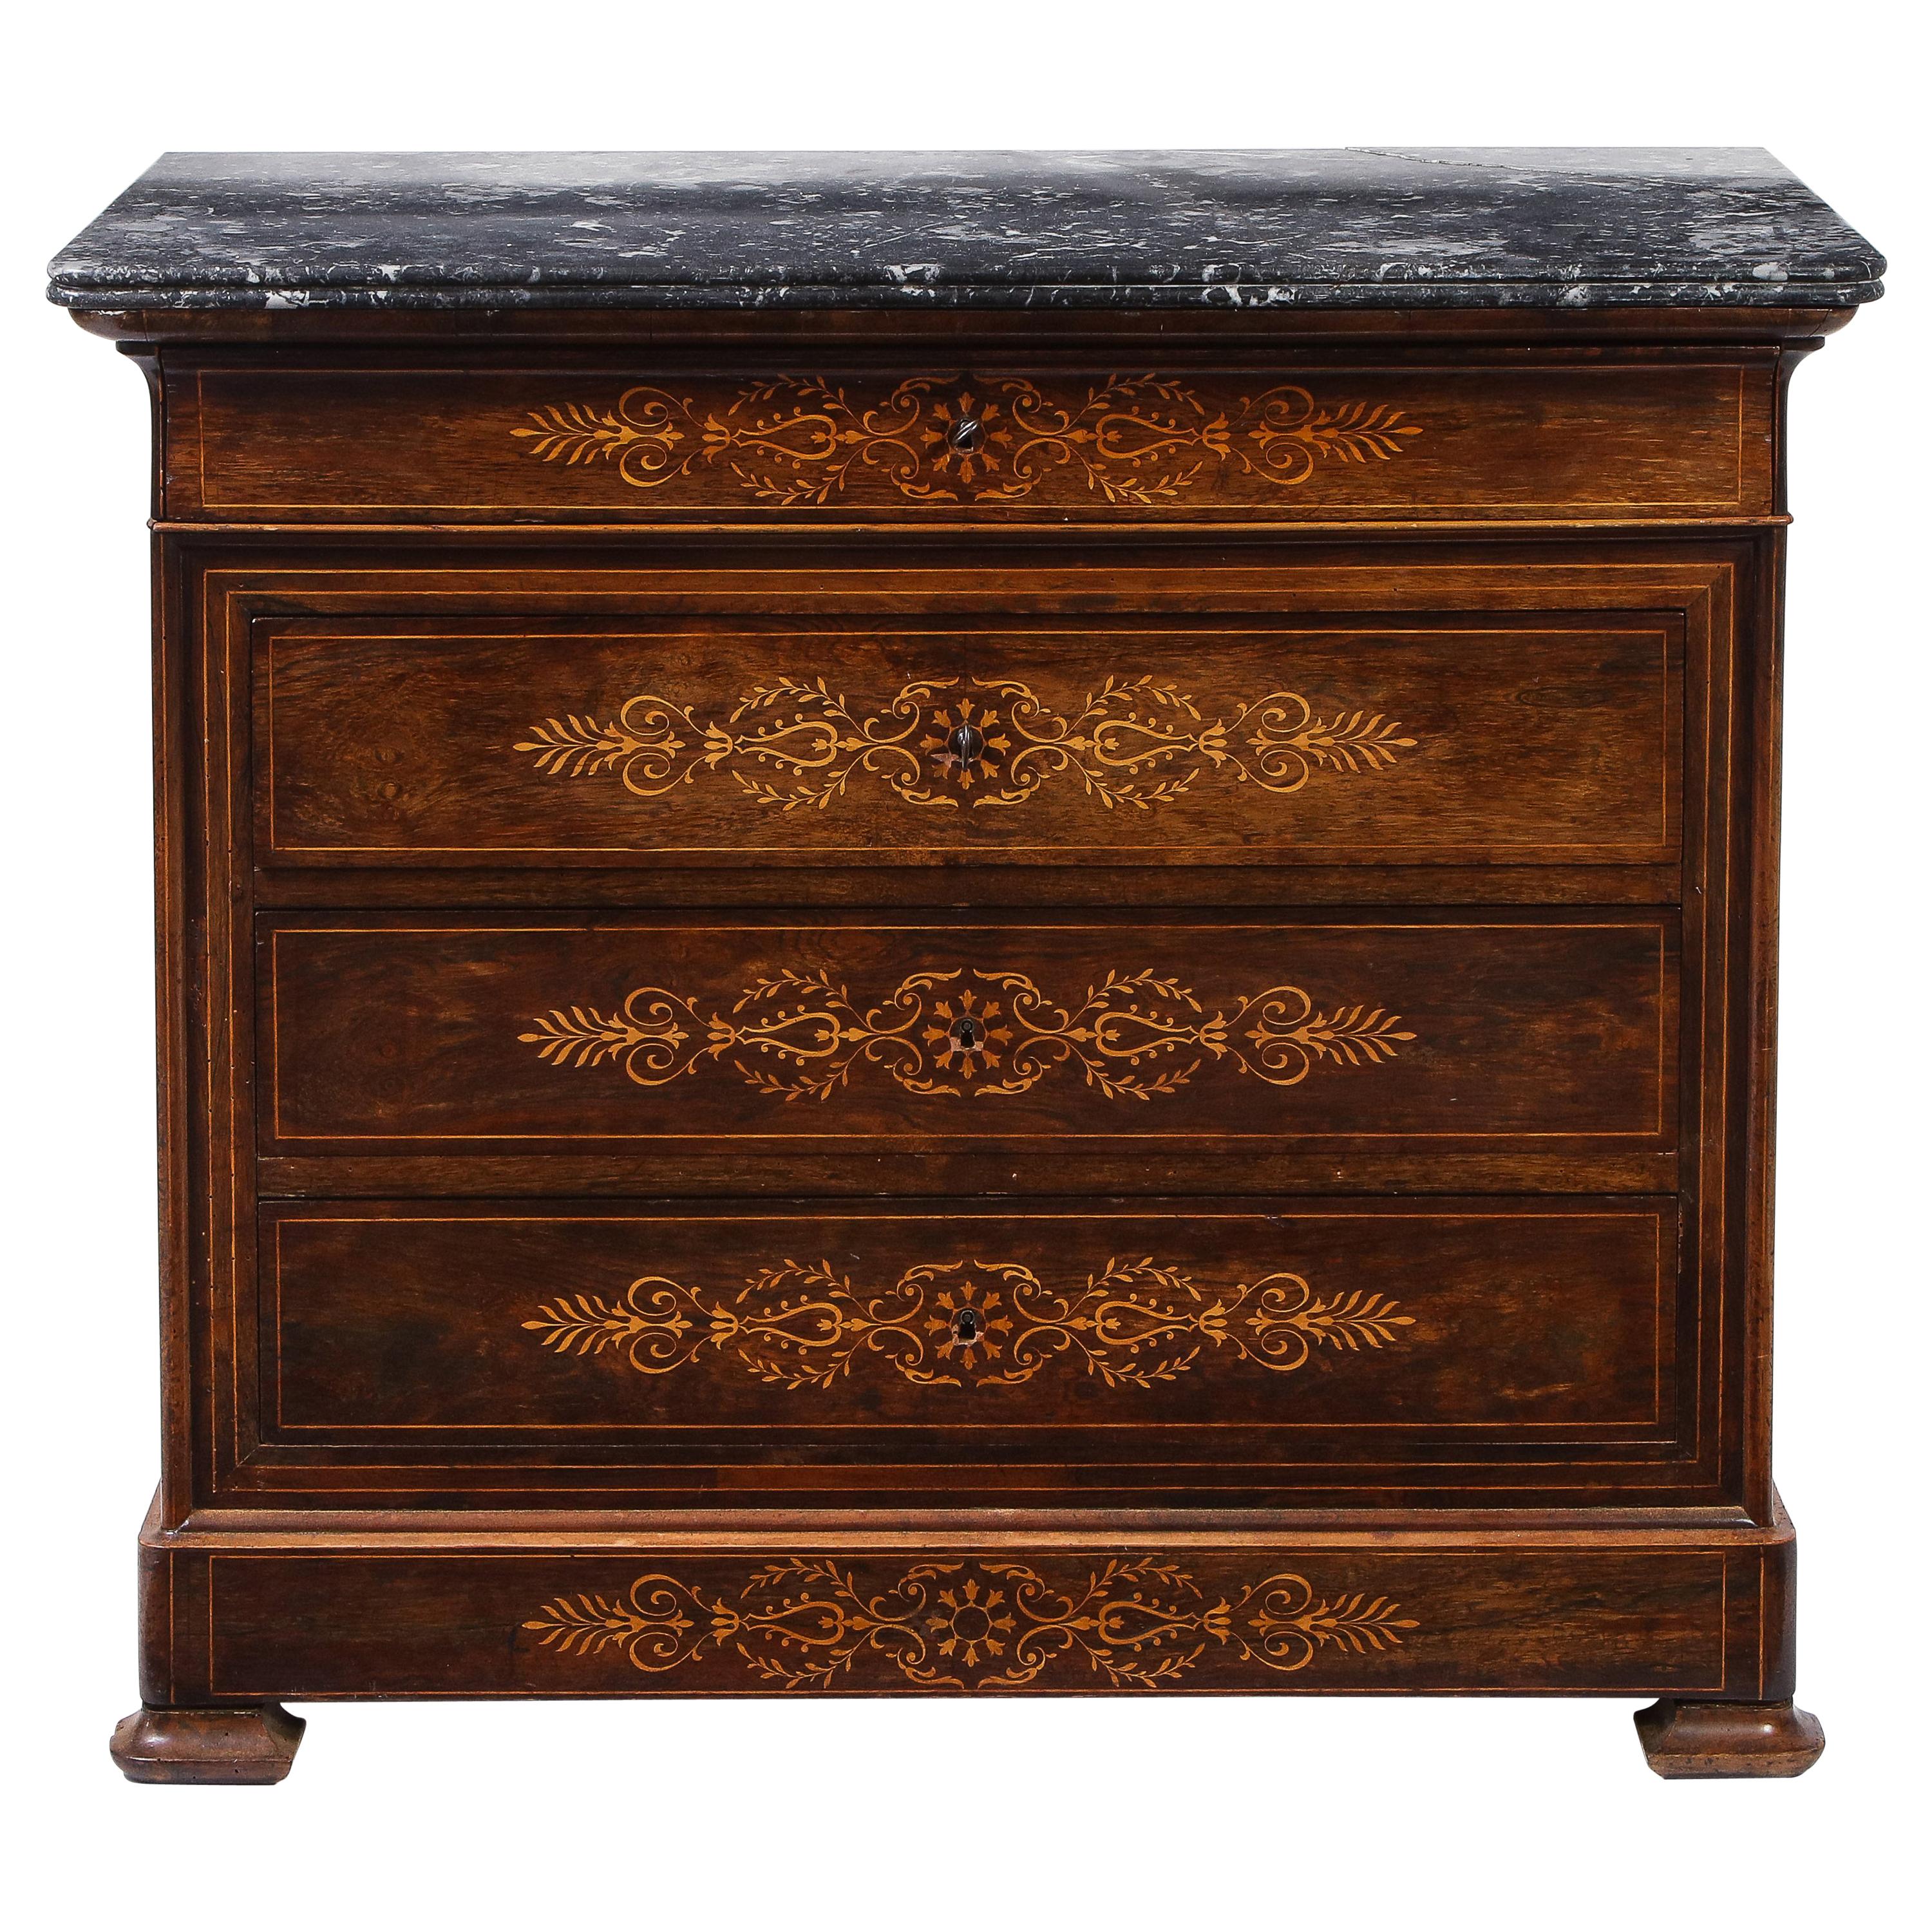 19th Century French Walnut Commode with Contrasting Marquetry, Honed Stone Top